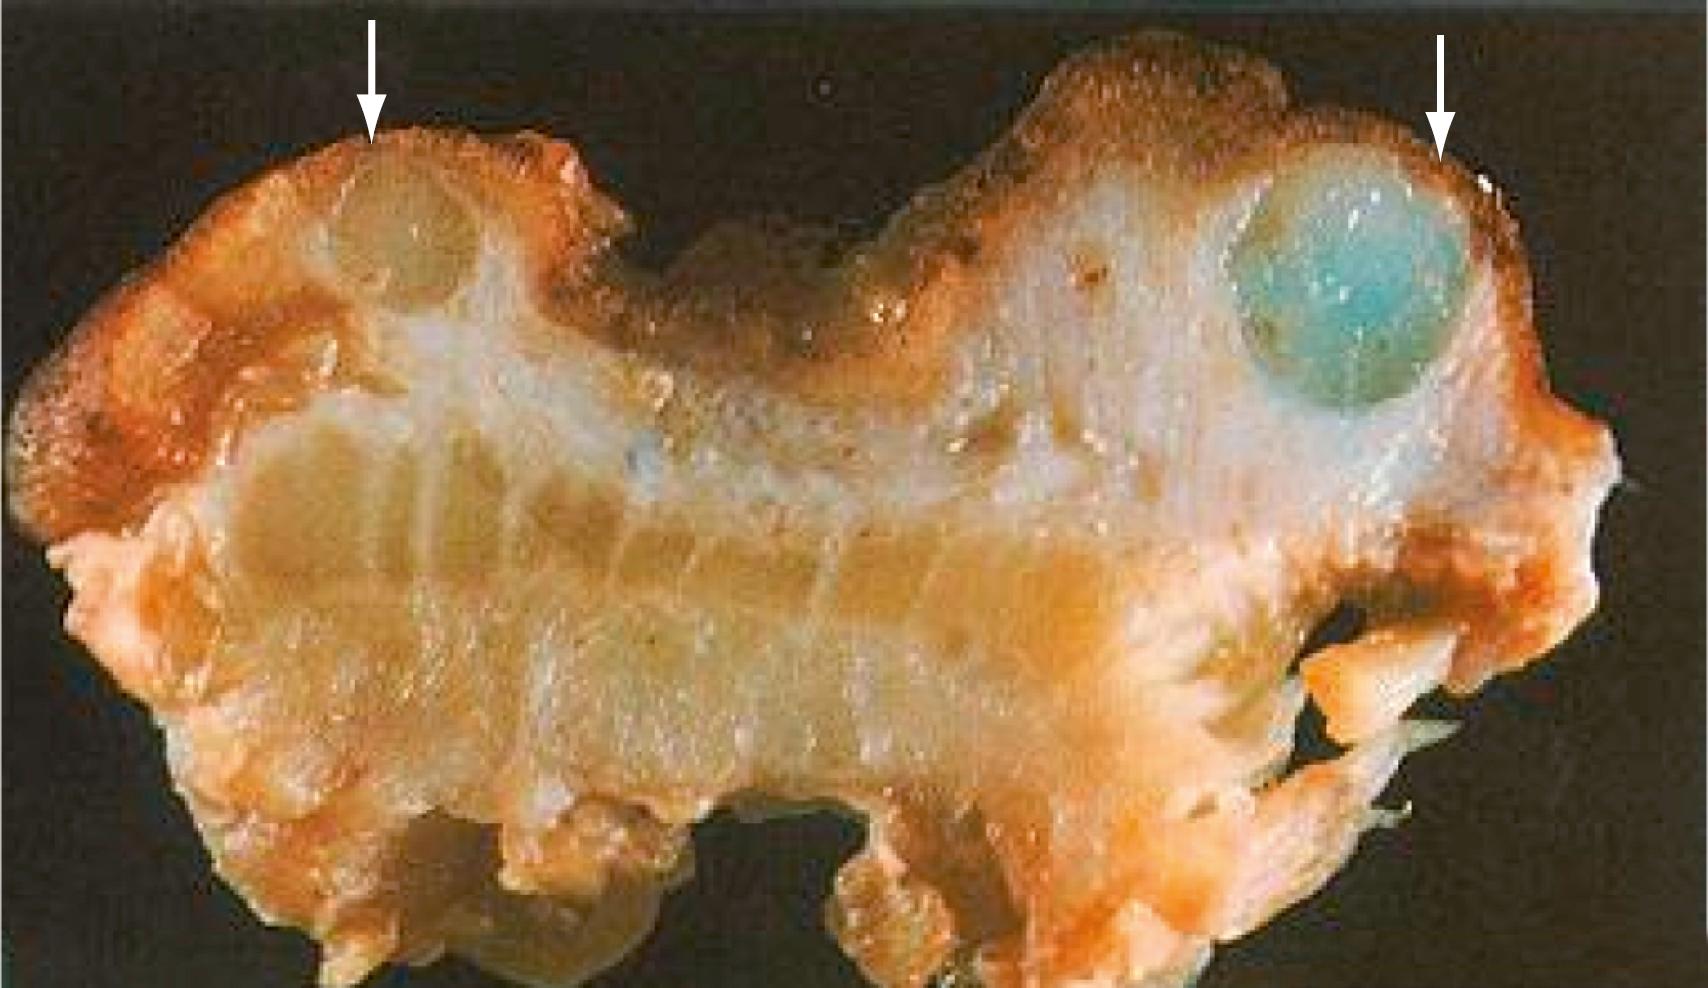 Fig. 128.4, Resection specimen of colitis cystica profunda. Several submucosal cysts are filled with mucinous material (arrows) . This entity occurs in the setting of chronic IBD as well as the solitary rectal ulcer syndrome, among many other disorders. These lesions have been confused with mucinous carcinomas, which also may be seen in chronic IBD.